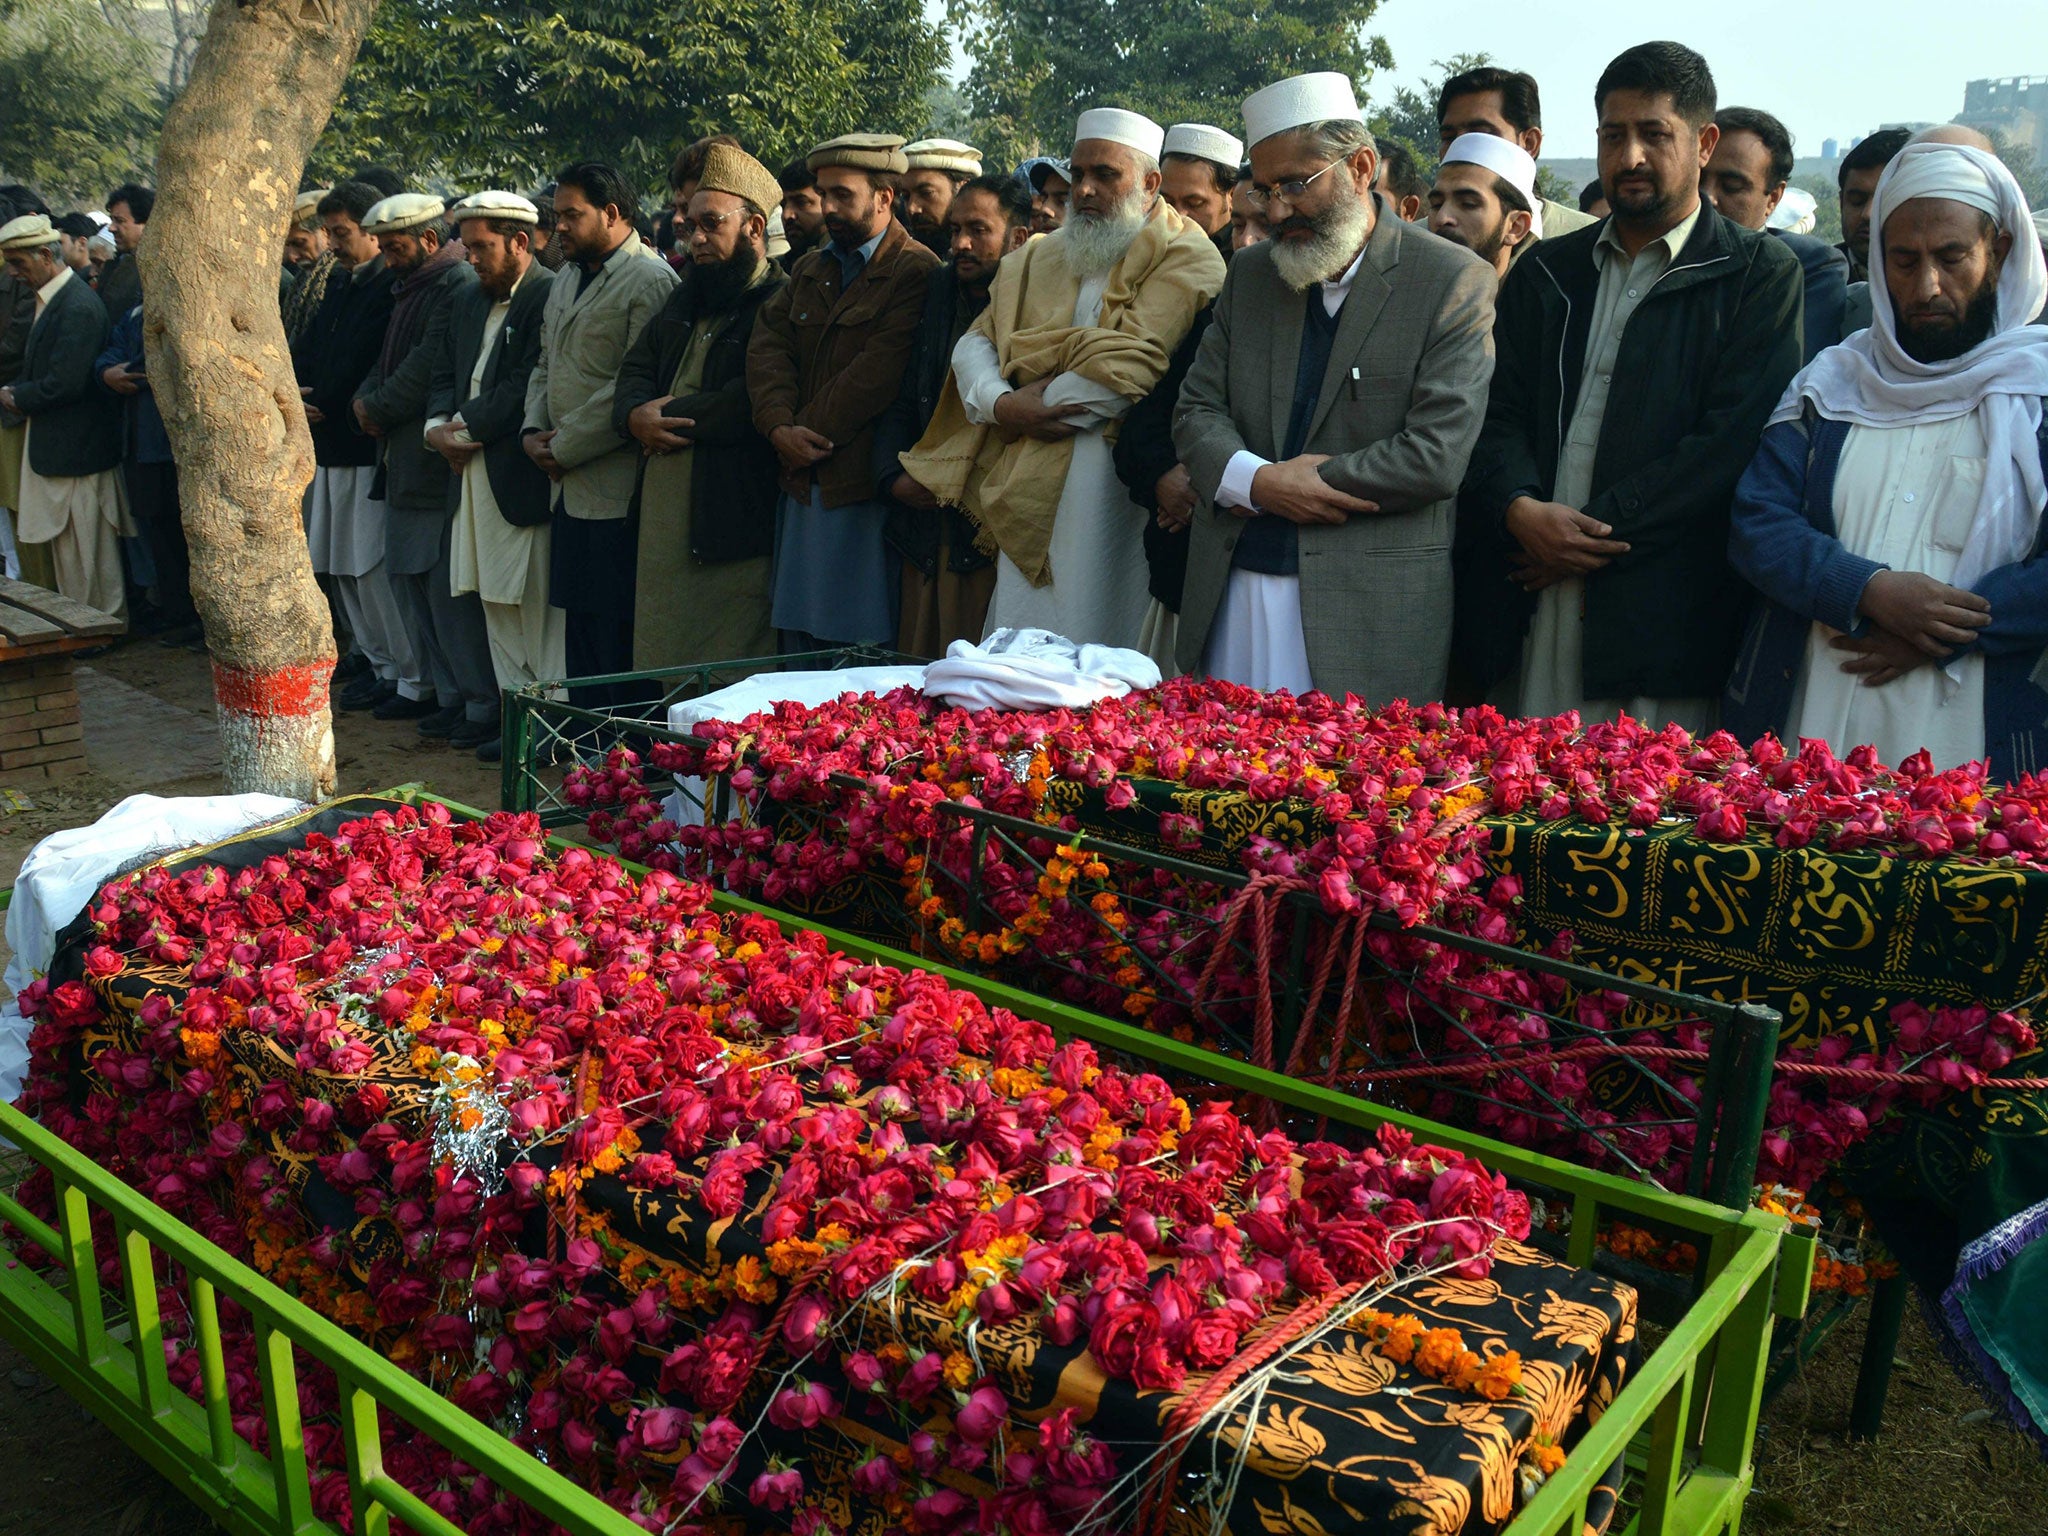 Sirajul Haq, head of the Islamic political party Jamat-e-Islami, leads the funeral prayers of two school boys who were killed by Taliban militants at a school run by the Army, in Peshawar, Pakistan